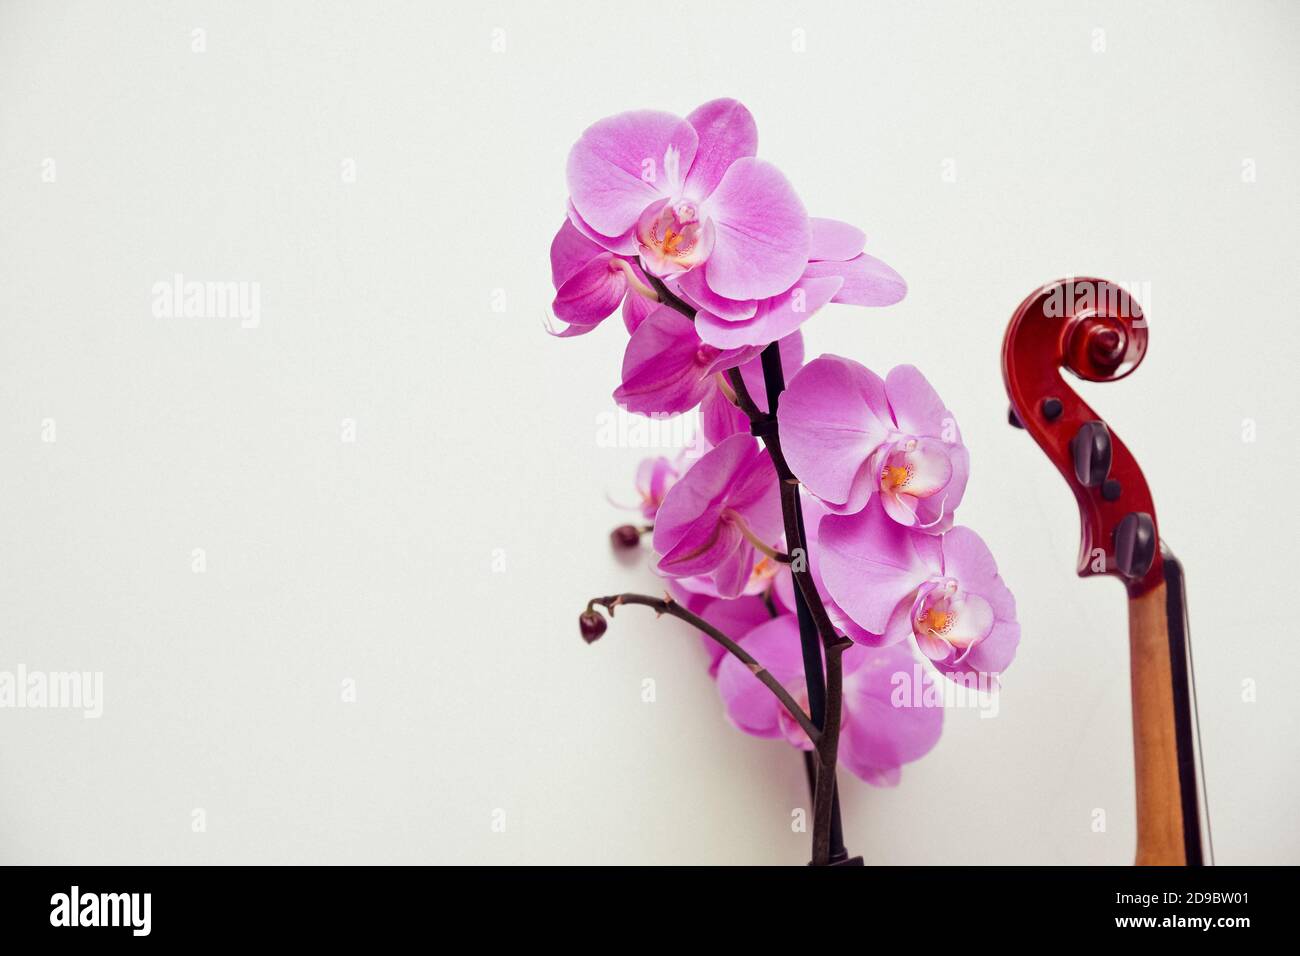 Bending violin fretboard and orchid flower on white background. Abstract composition combining the beauty of nature and art Stock Photo